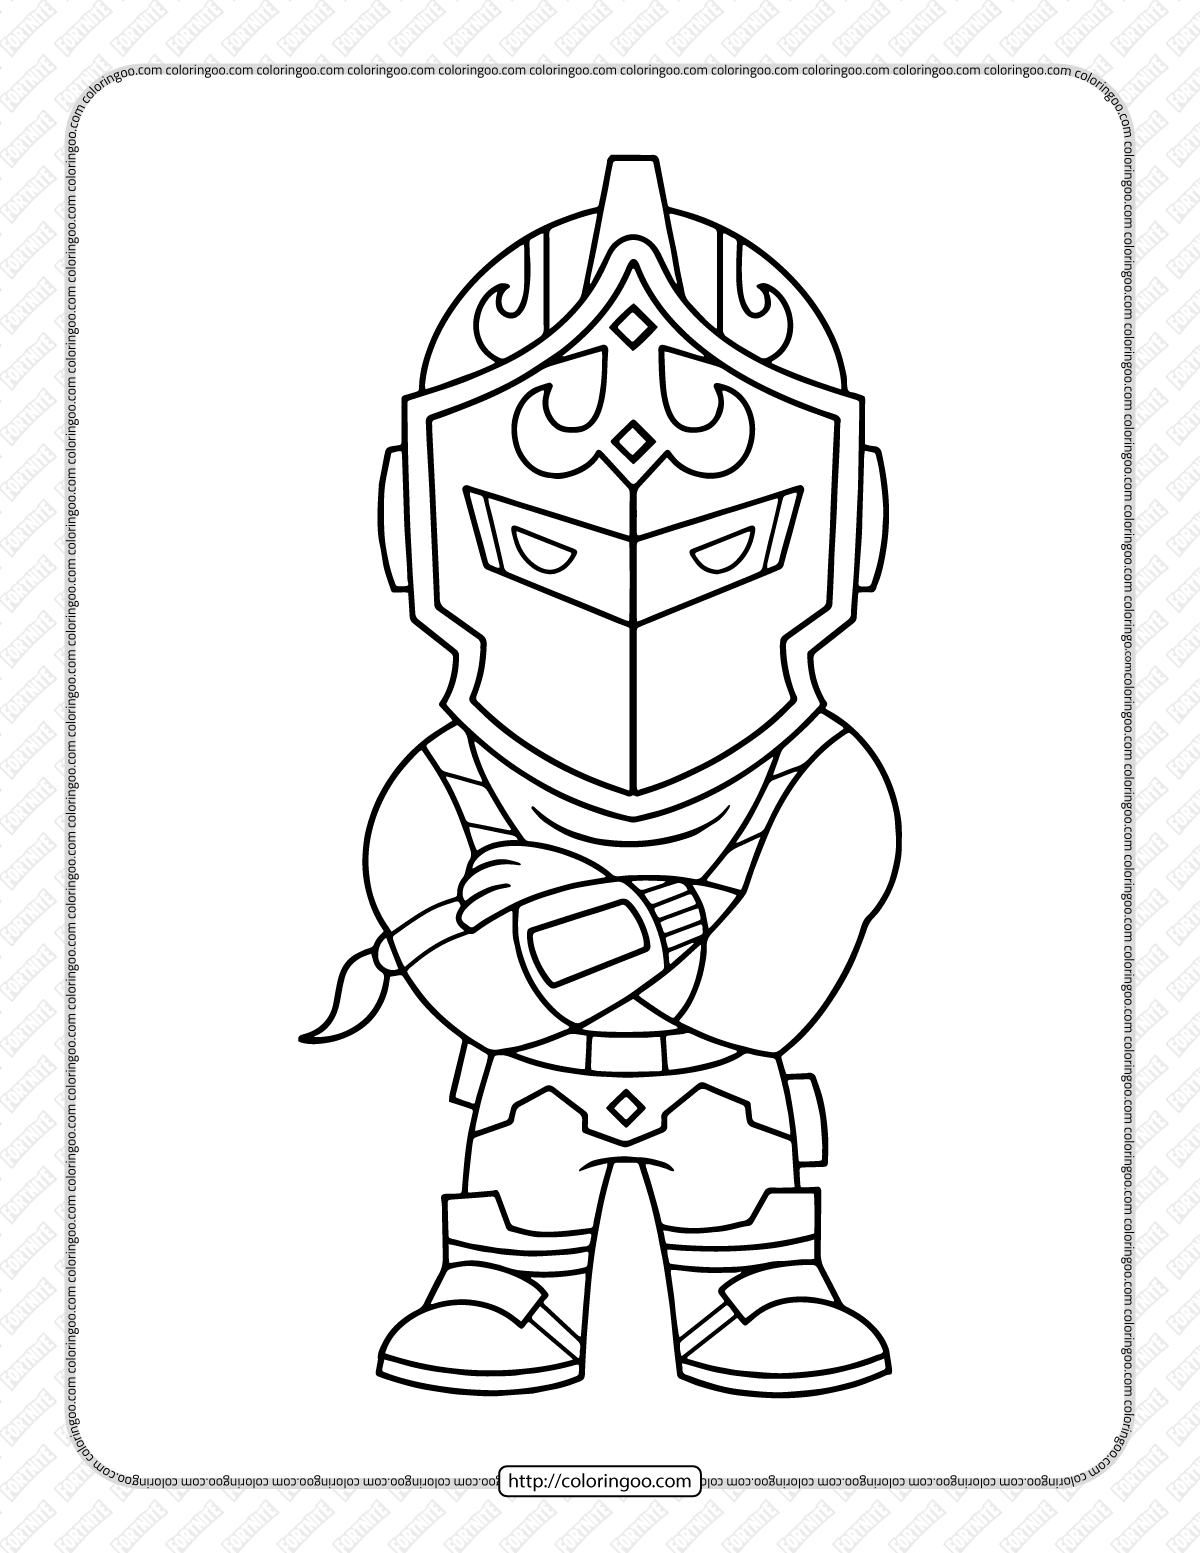 chibi fortnite coloring pages 38